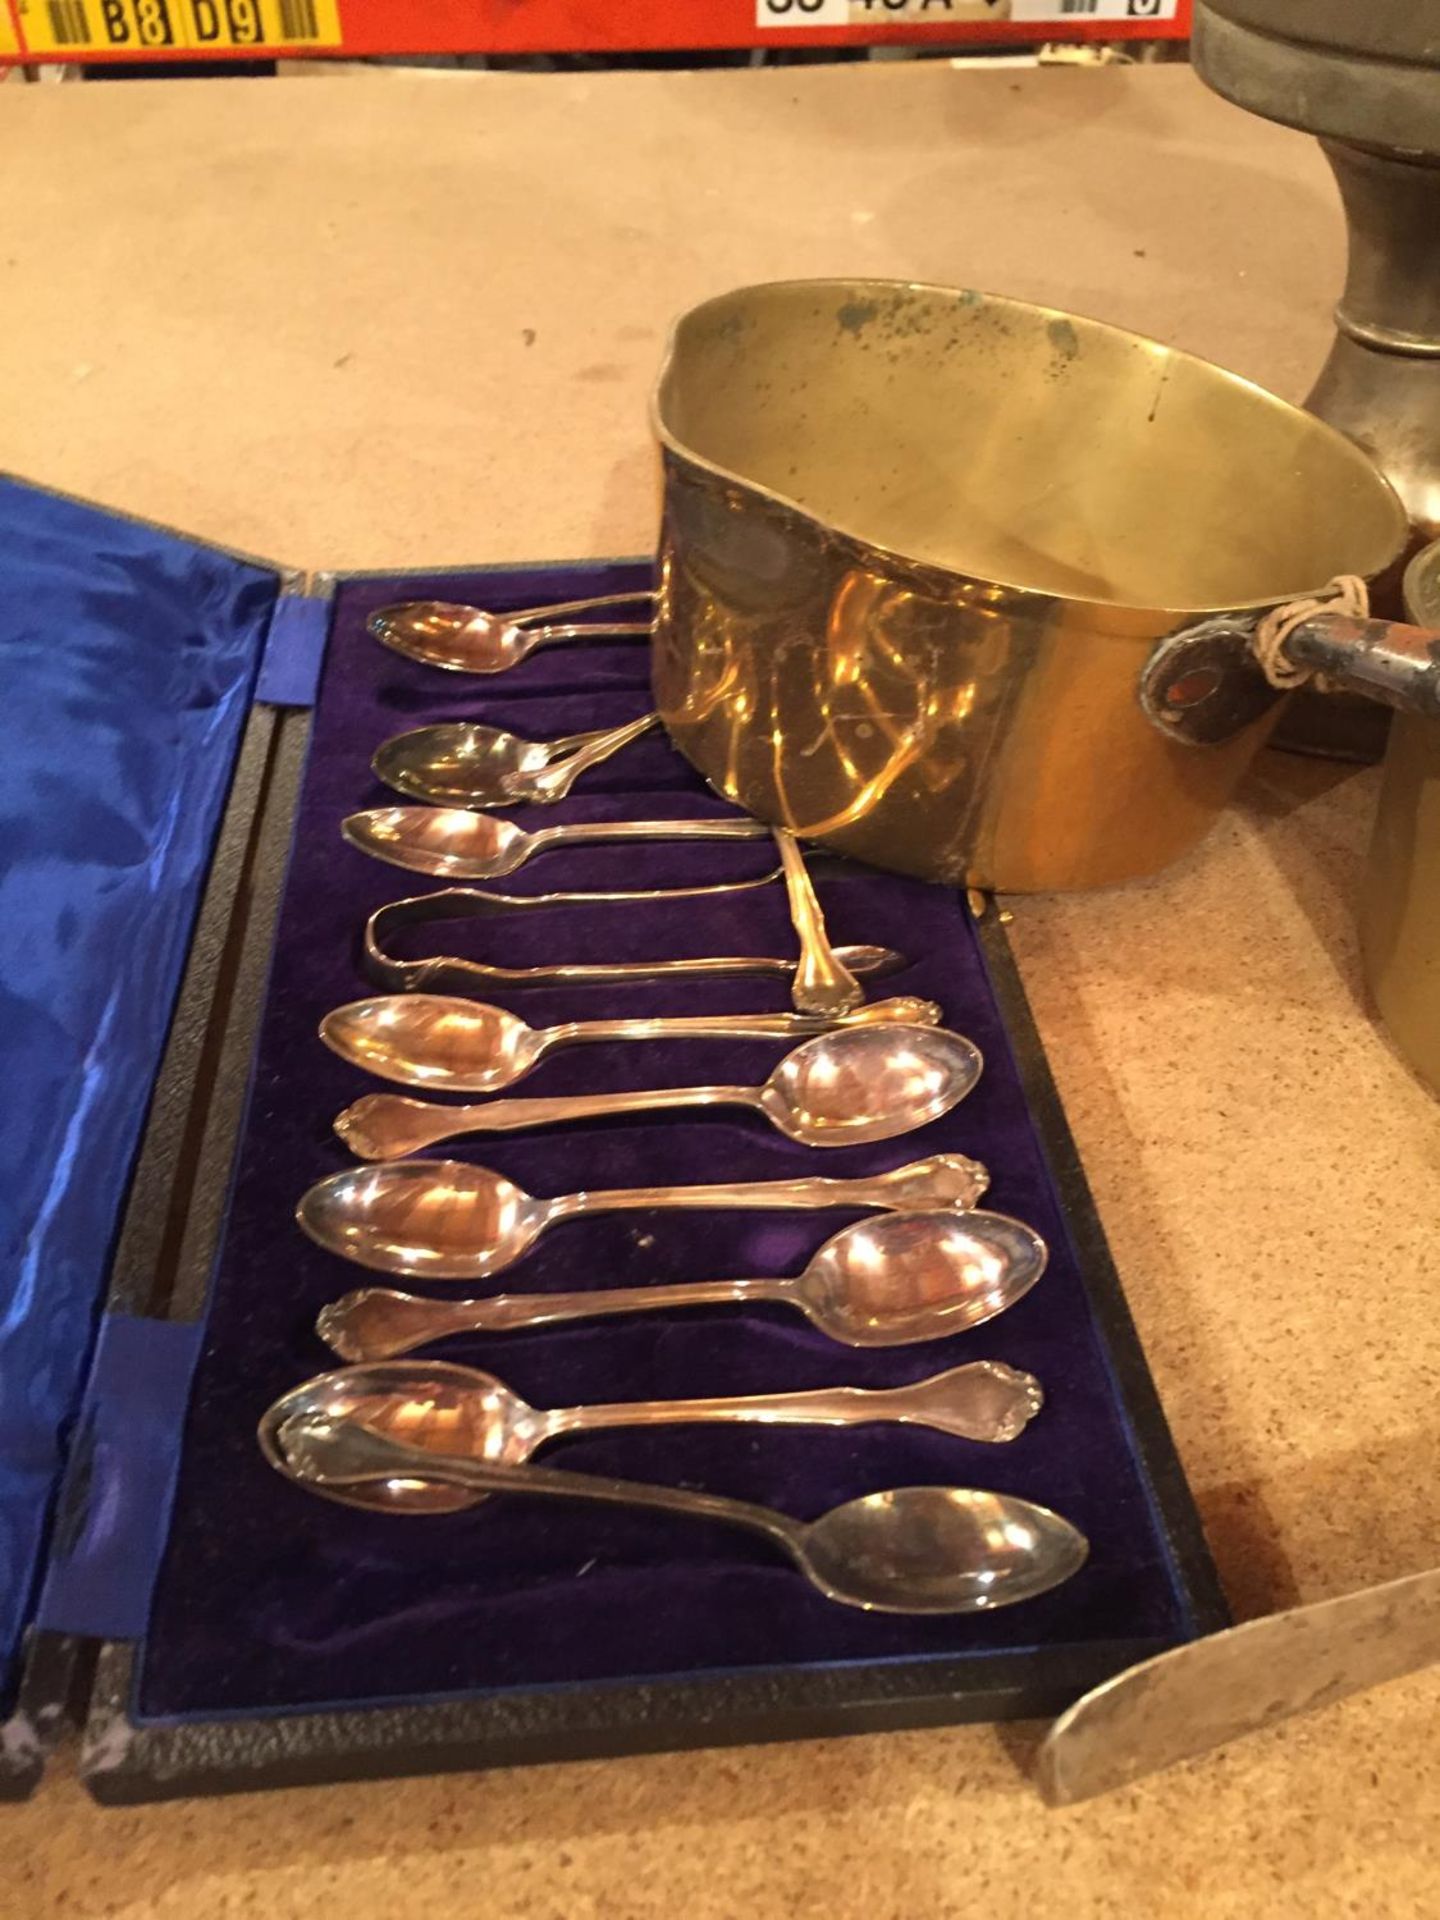 TWO BRASS PANS, AN OIL LAMP, LADEL AND A BOX OF SPOONS - Image 2 of 4